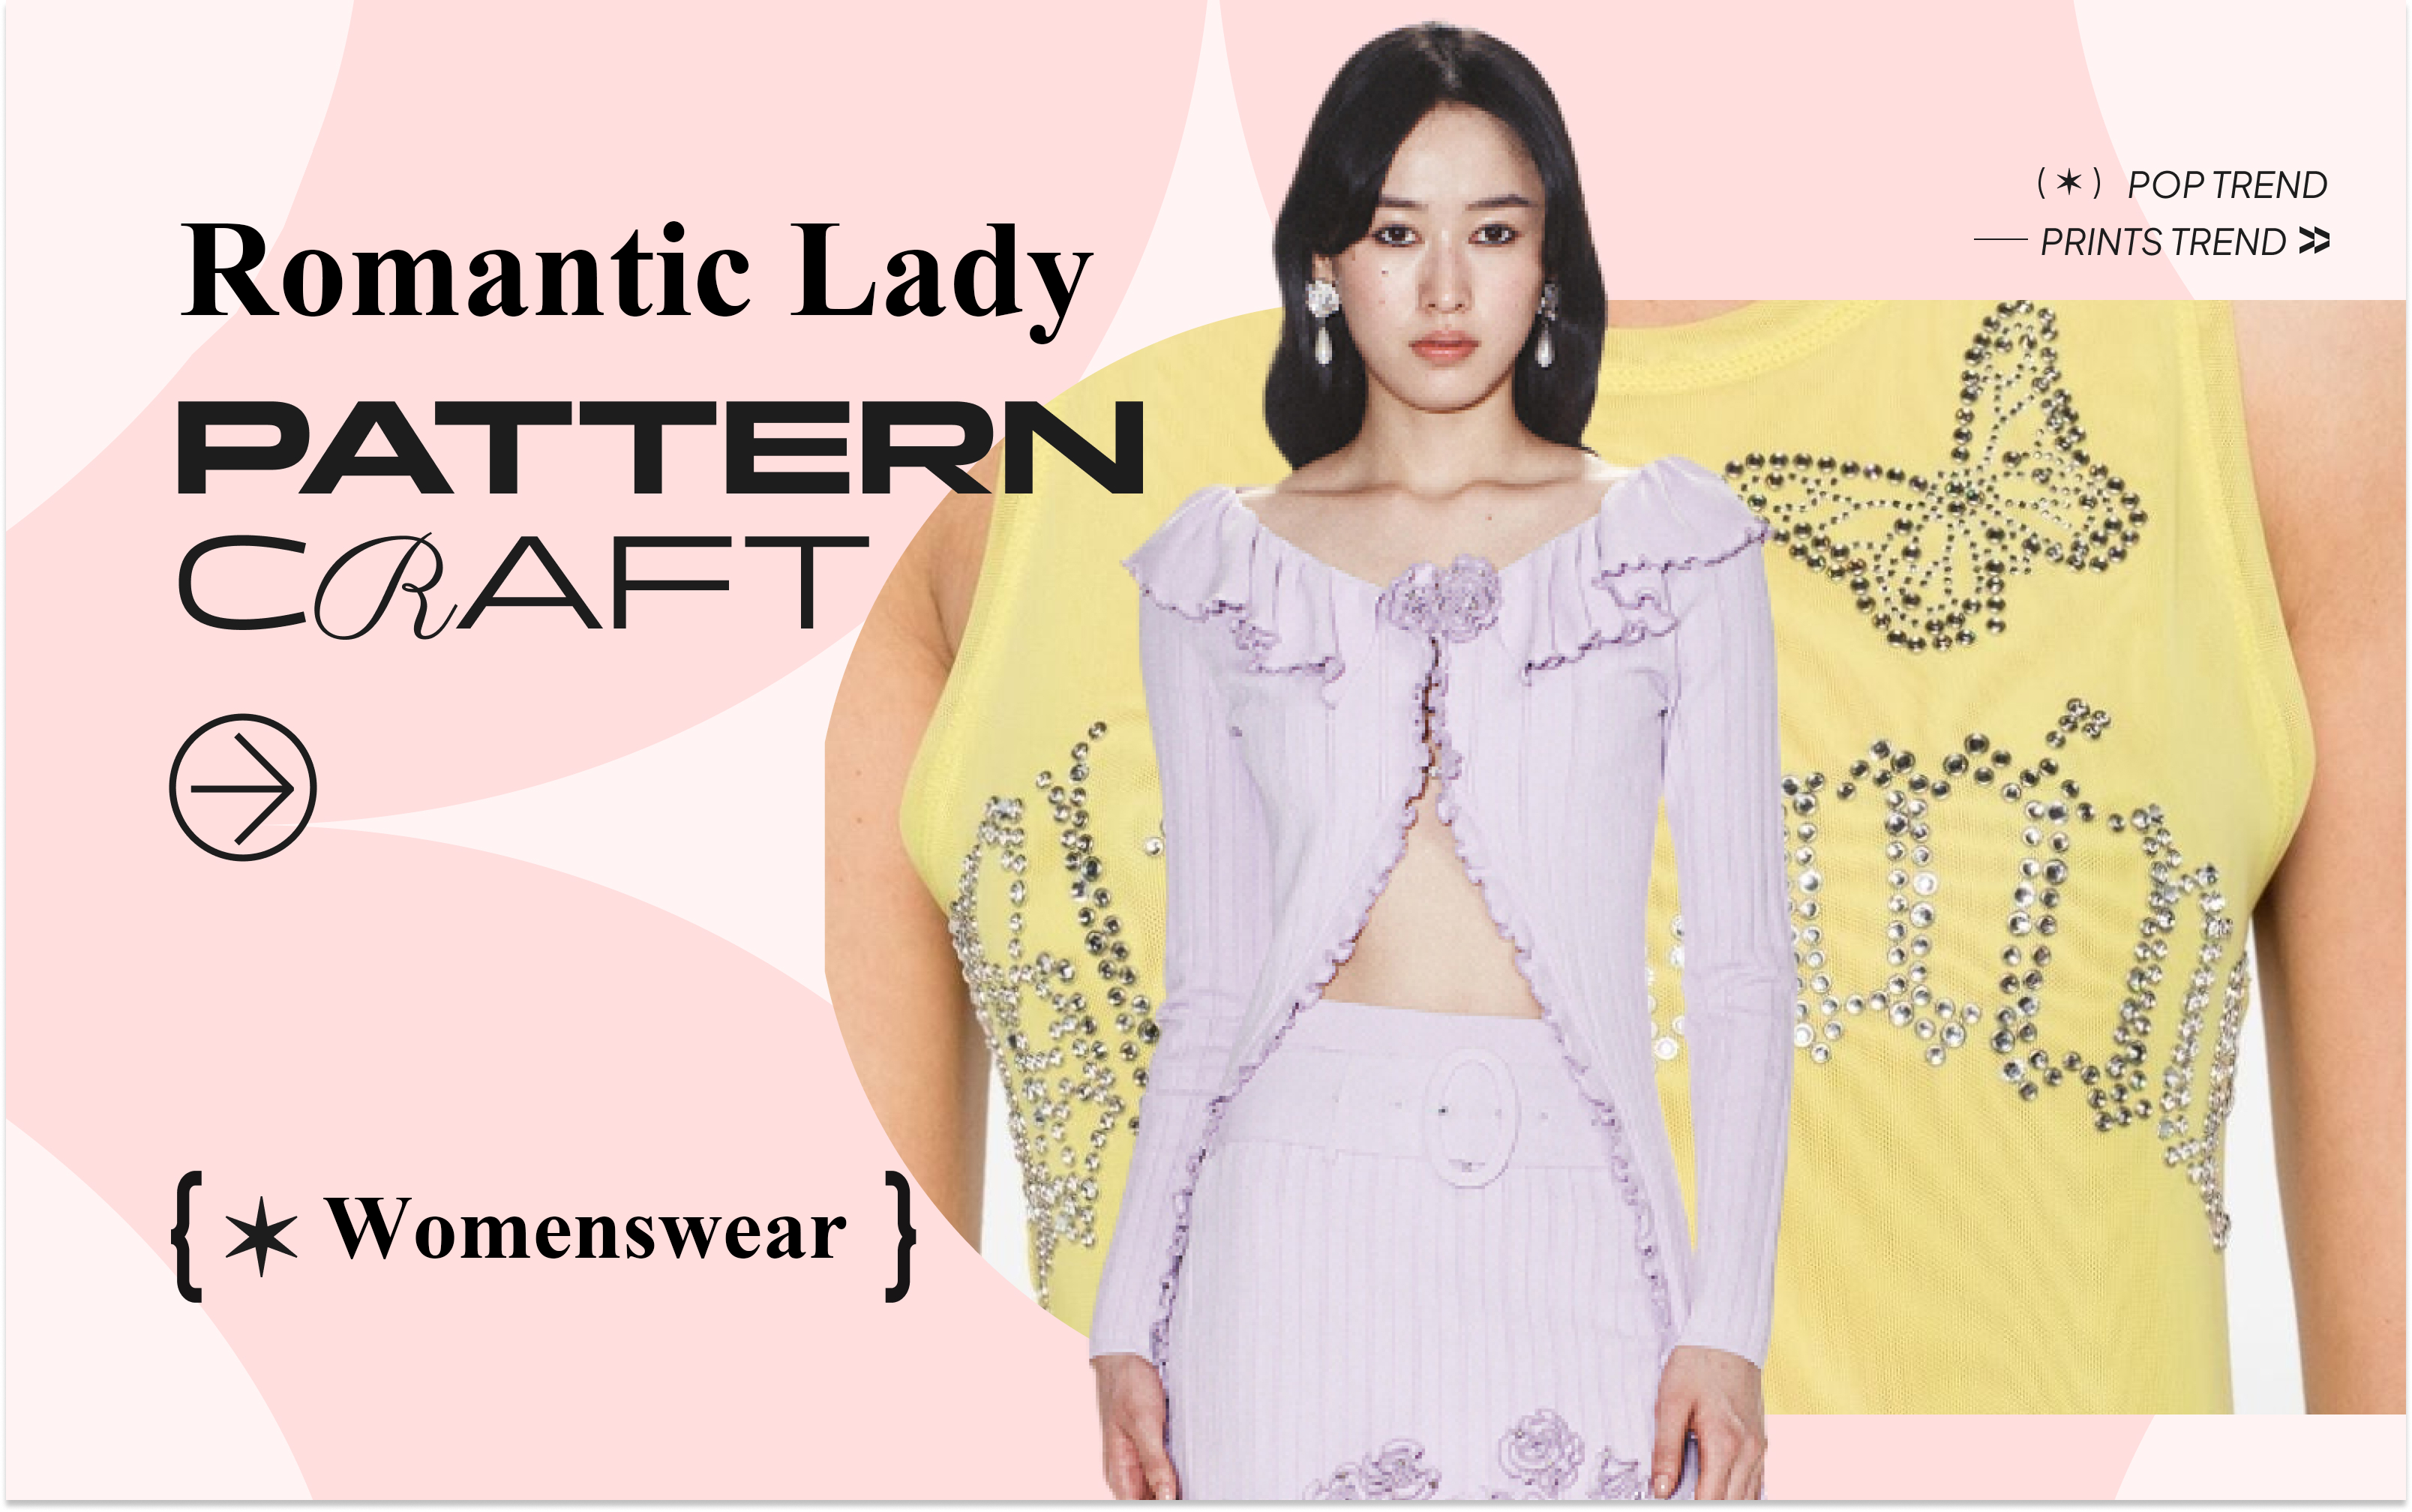 Romantic Lady -- The Pattern Craft Trend for Women's Knitwear